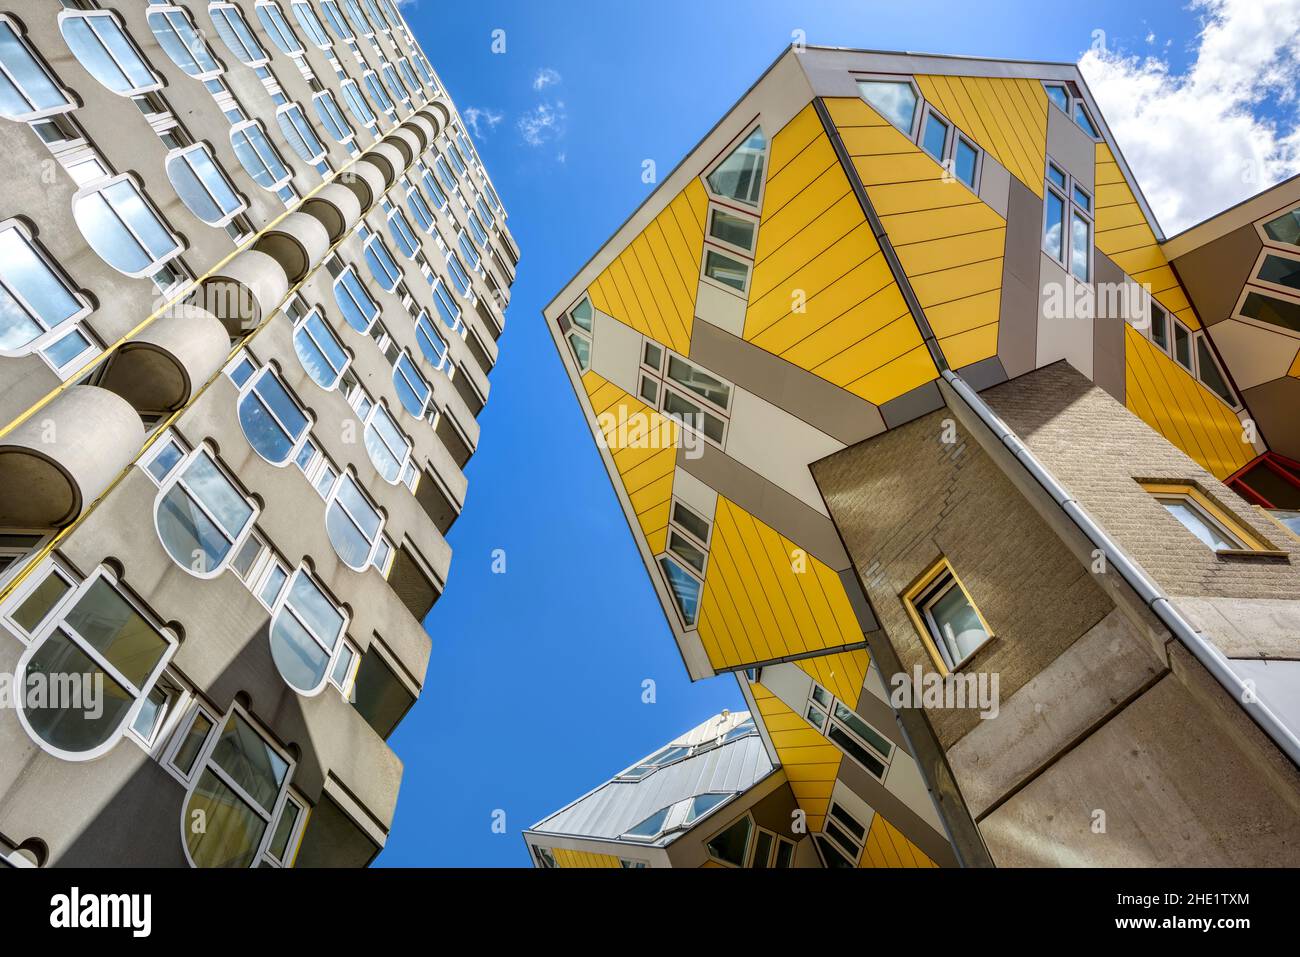 Rotterdam, Netherlands - 20 July 2020: The Cube houses, a world famous example of contemporary architecture, one of the most visited landmarks in Rott Stock Photo